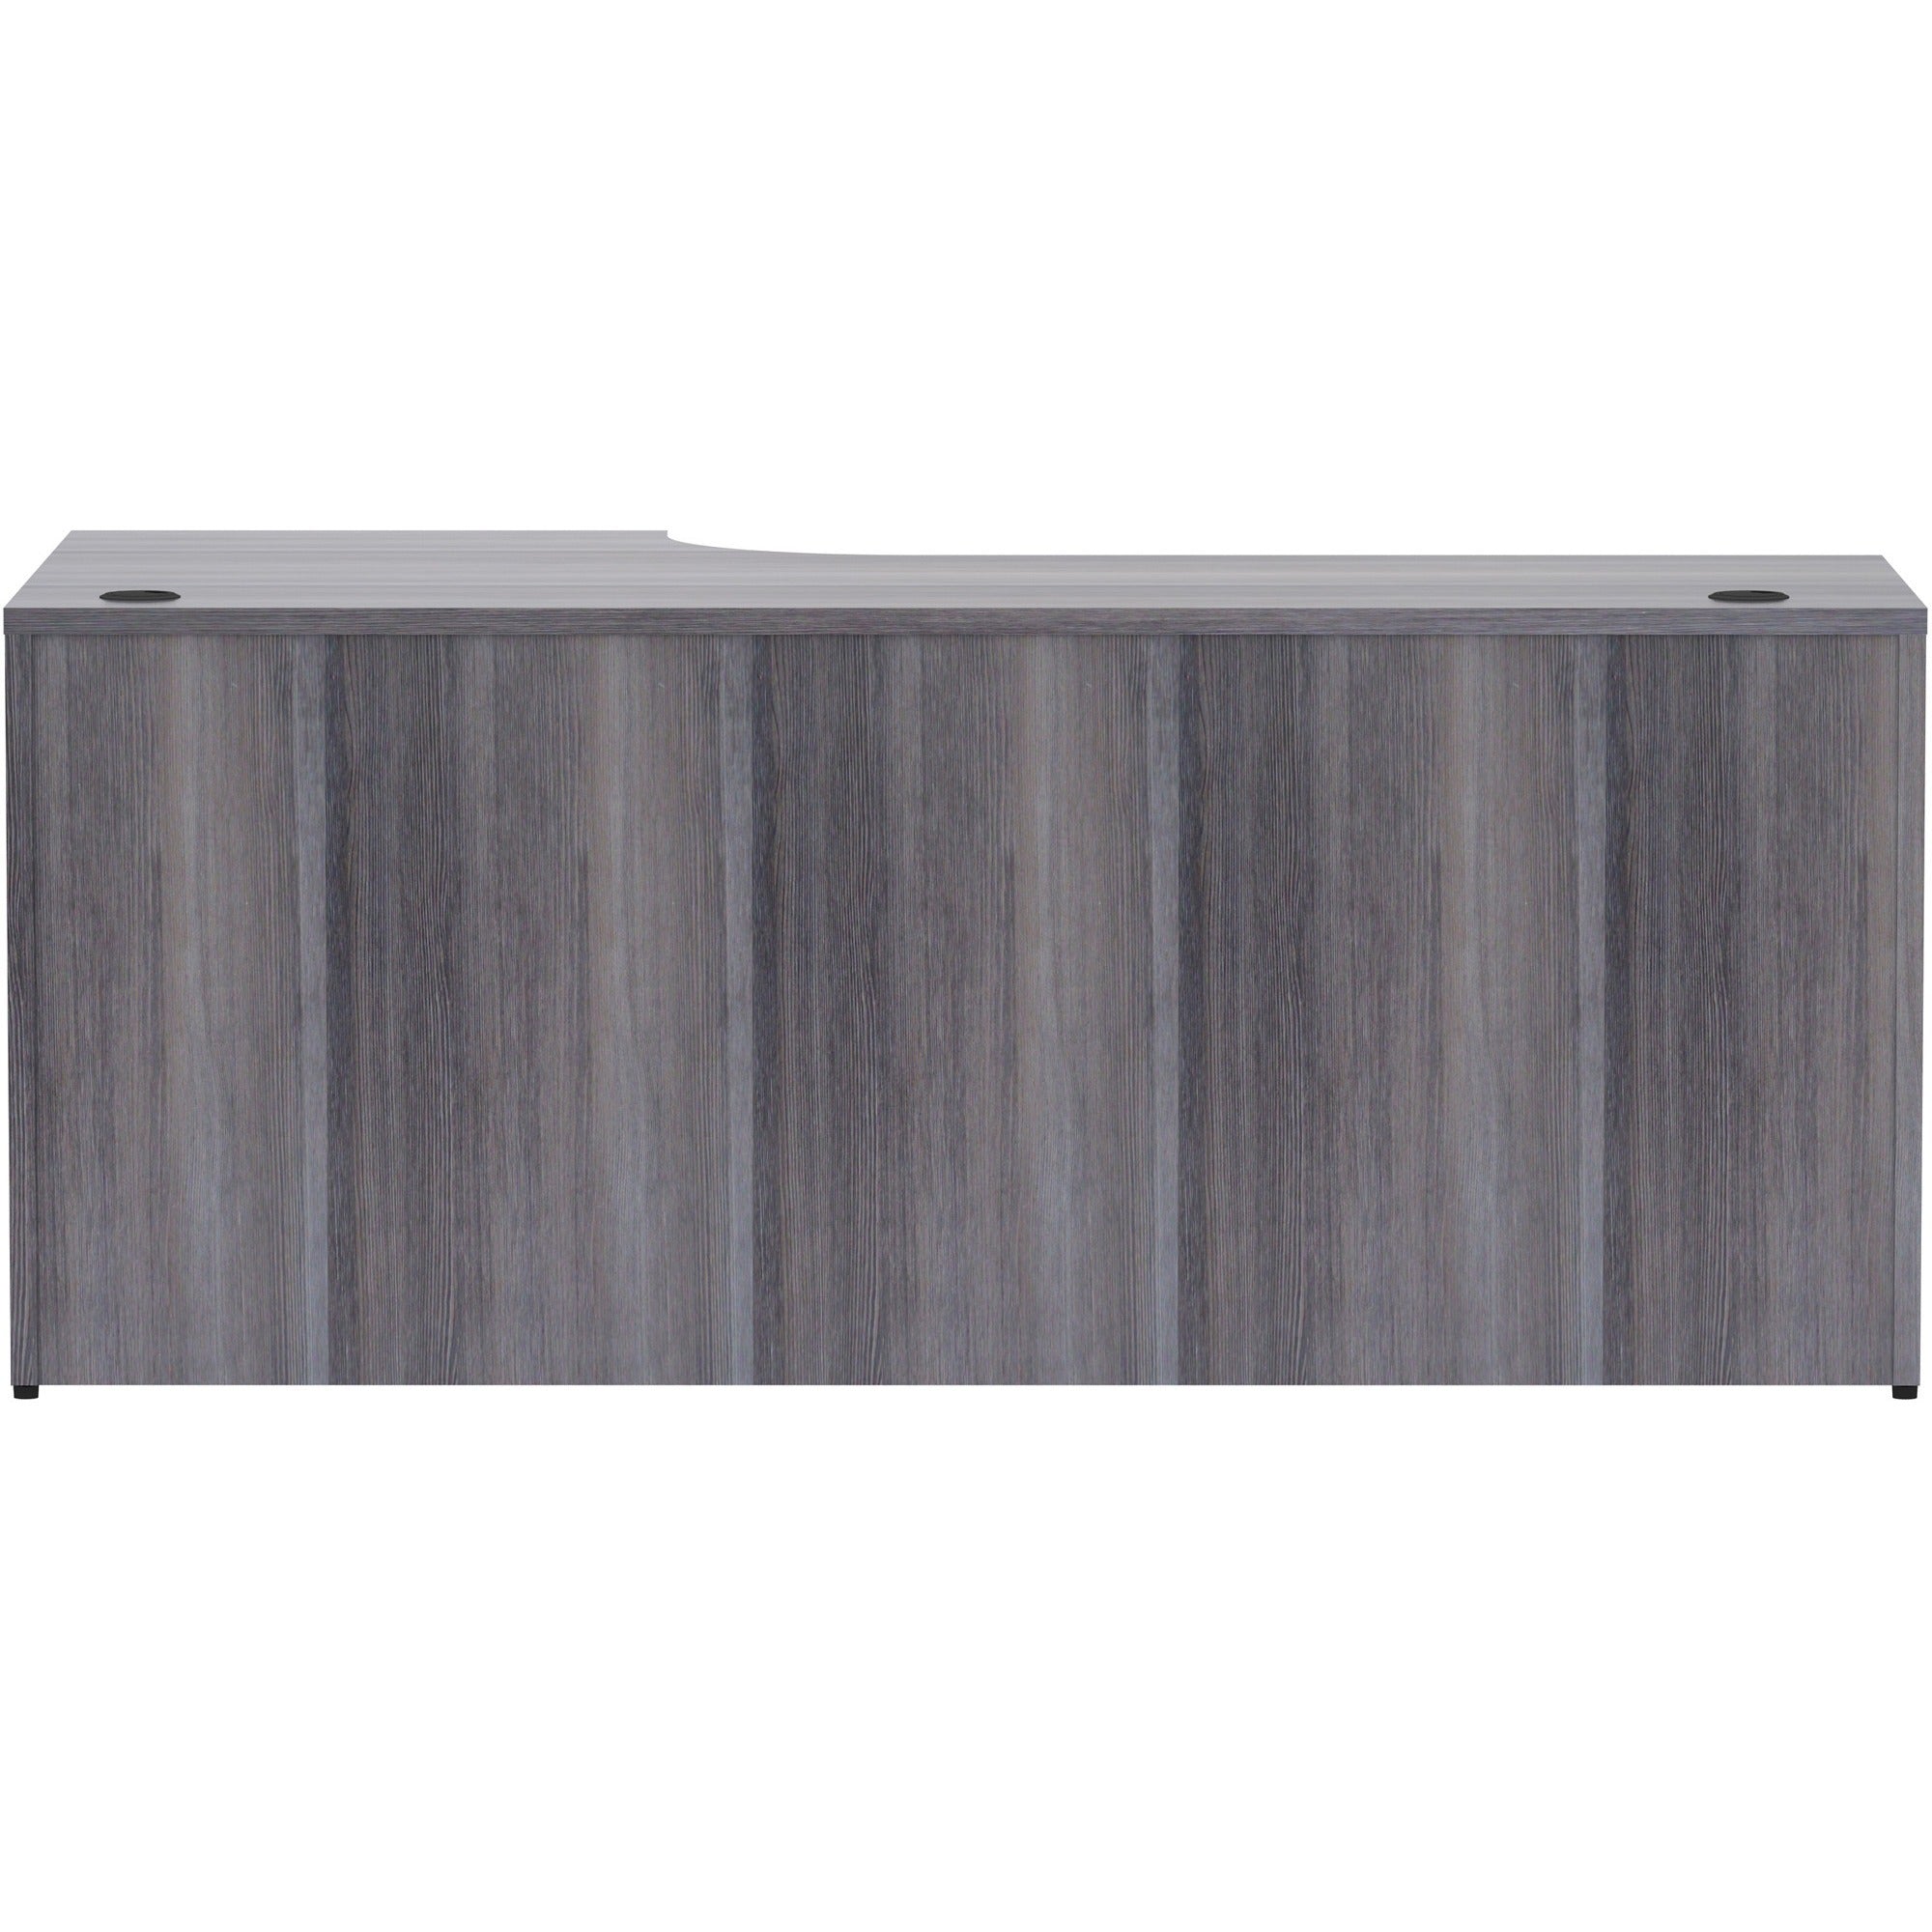 lorell-essentials-seriese-right-corner-credenza-72-x-36-x-24295-credenza-1-top-finish-weathered-charcoal-laminate_llr69599 - 3